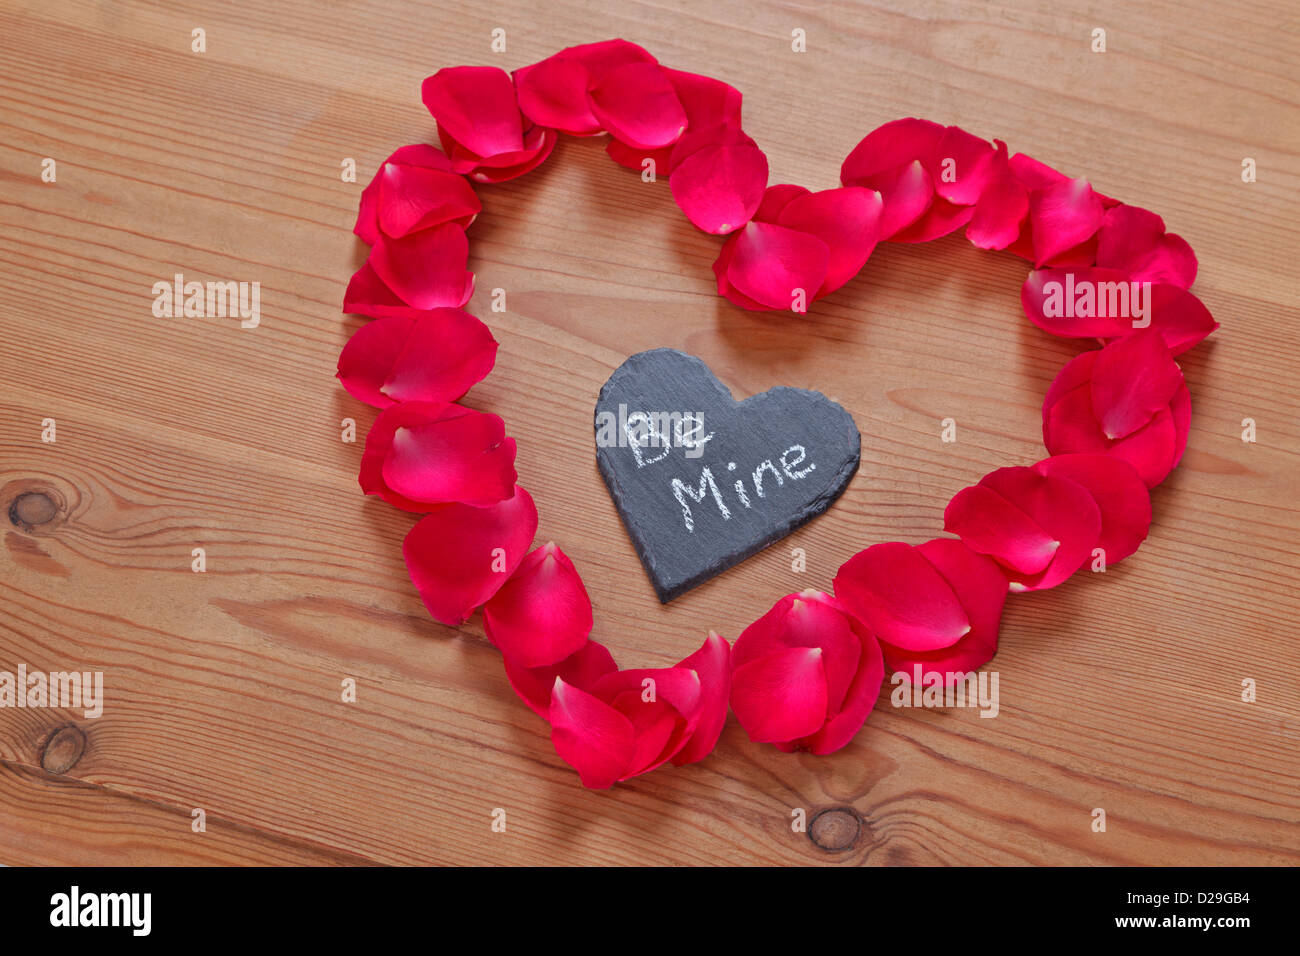 Red rose petals and slate in a heart shape with a romantic love ...